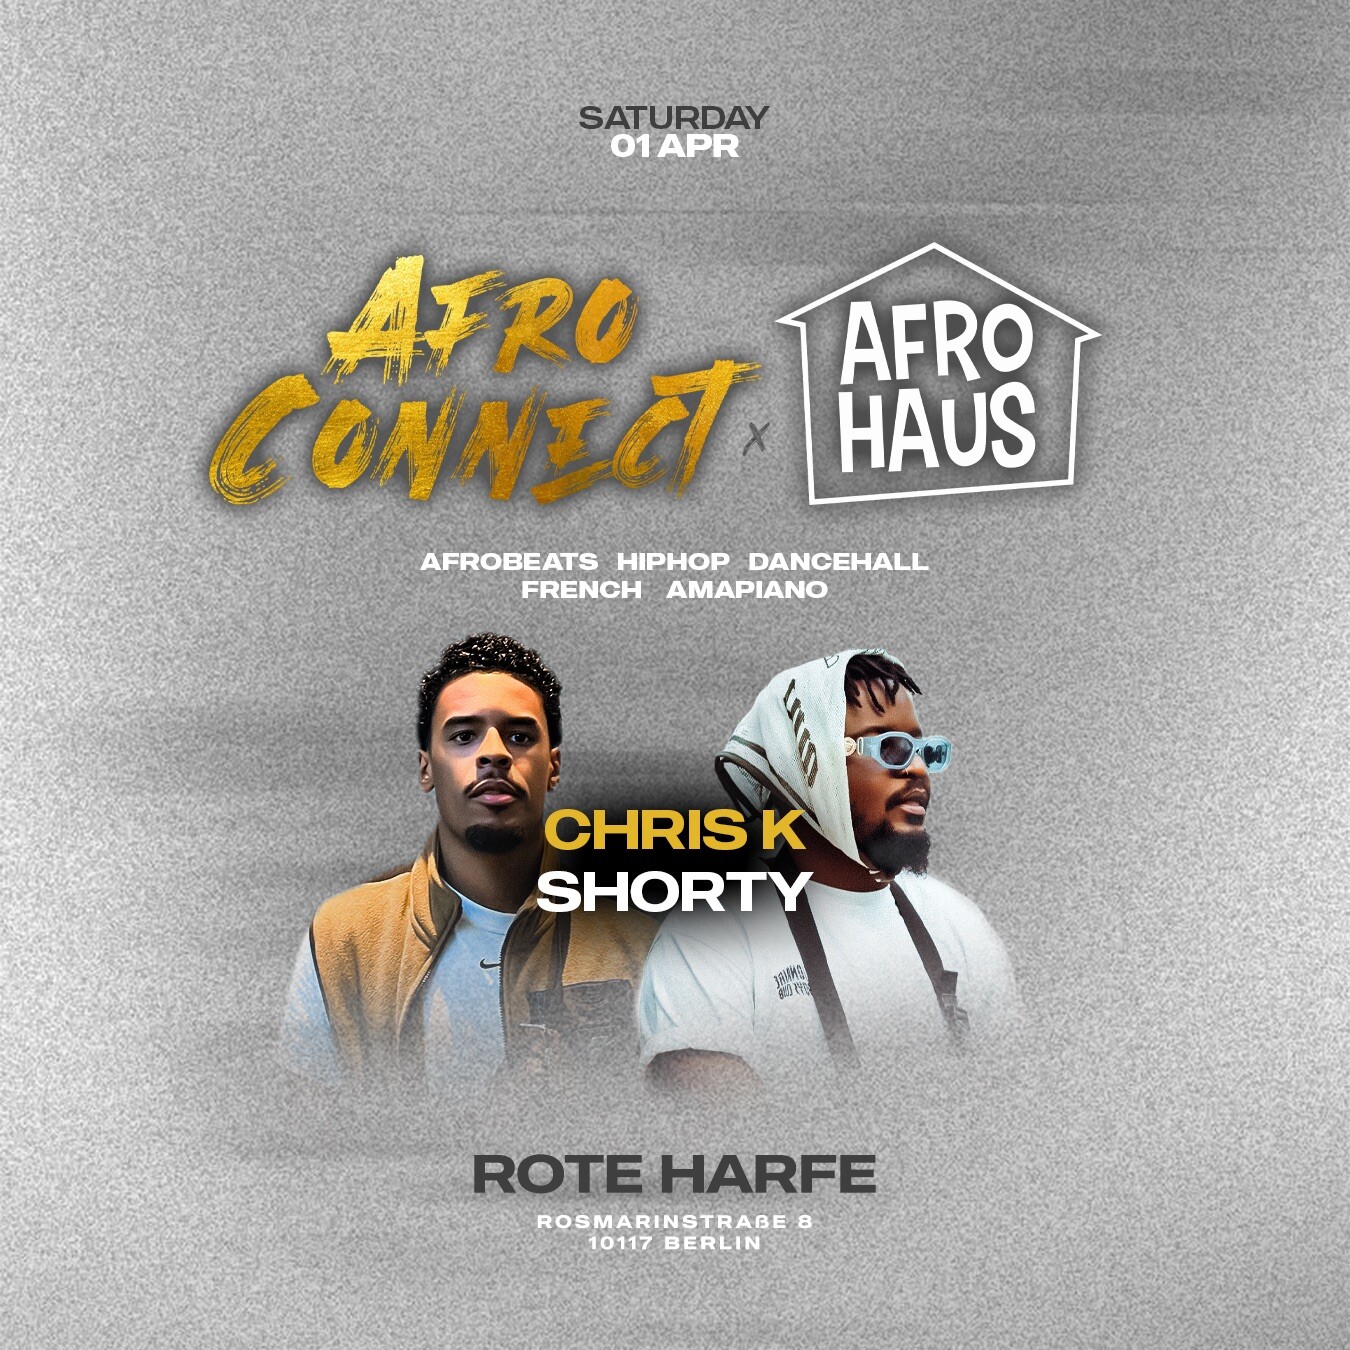 Rote Harfe Mitte 01.04.2023 Afrohaus x Afroconnect